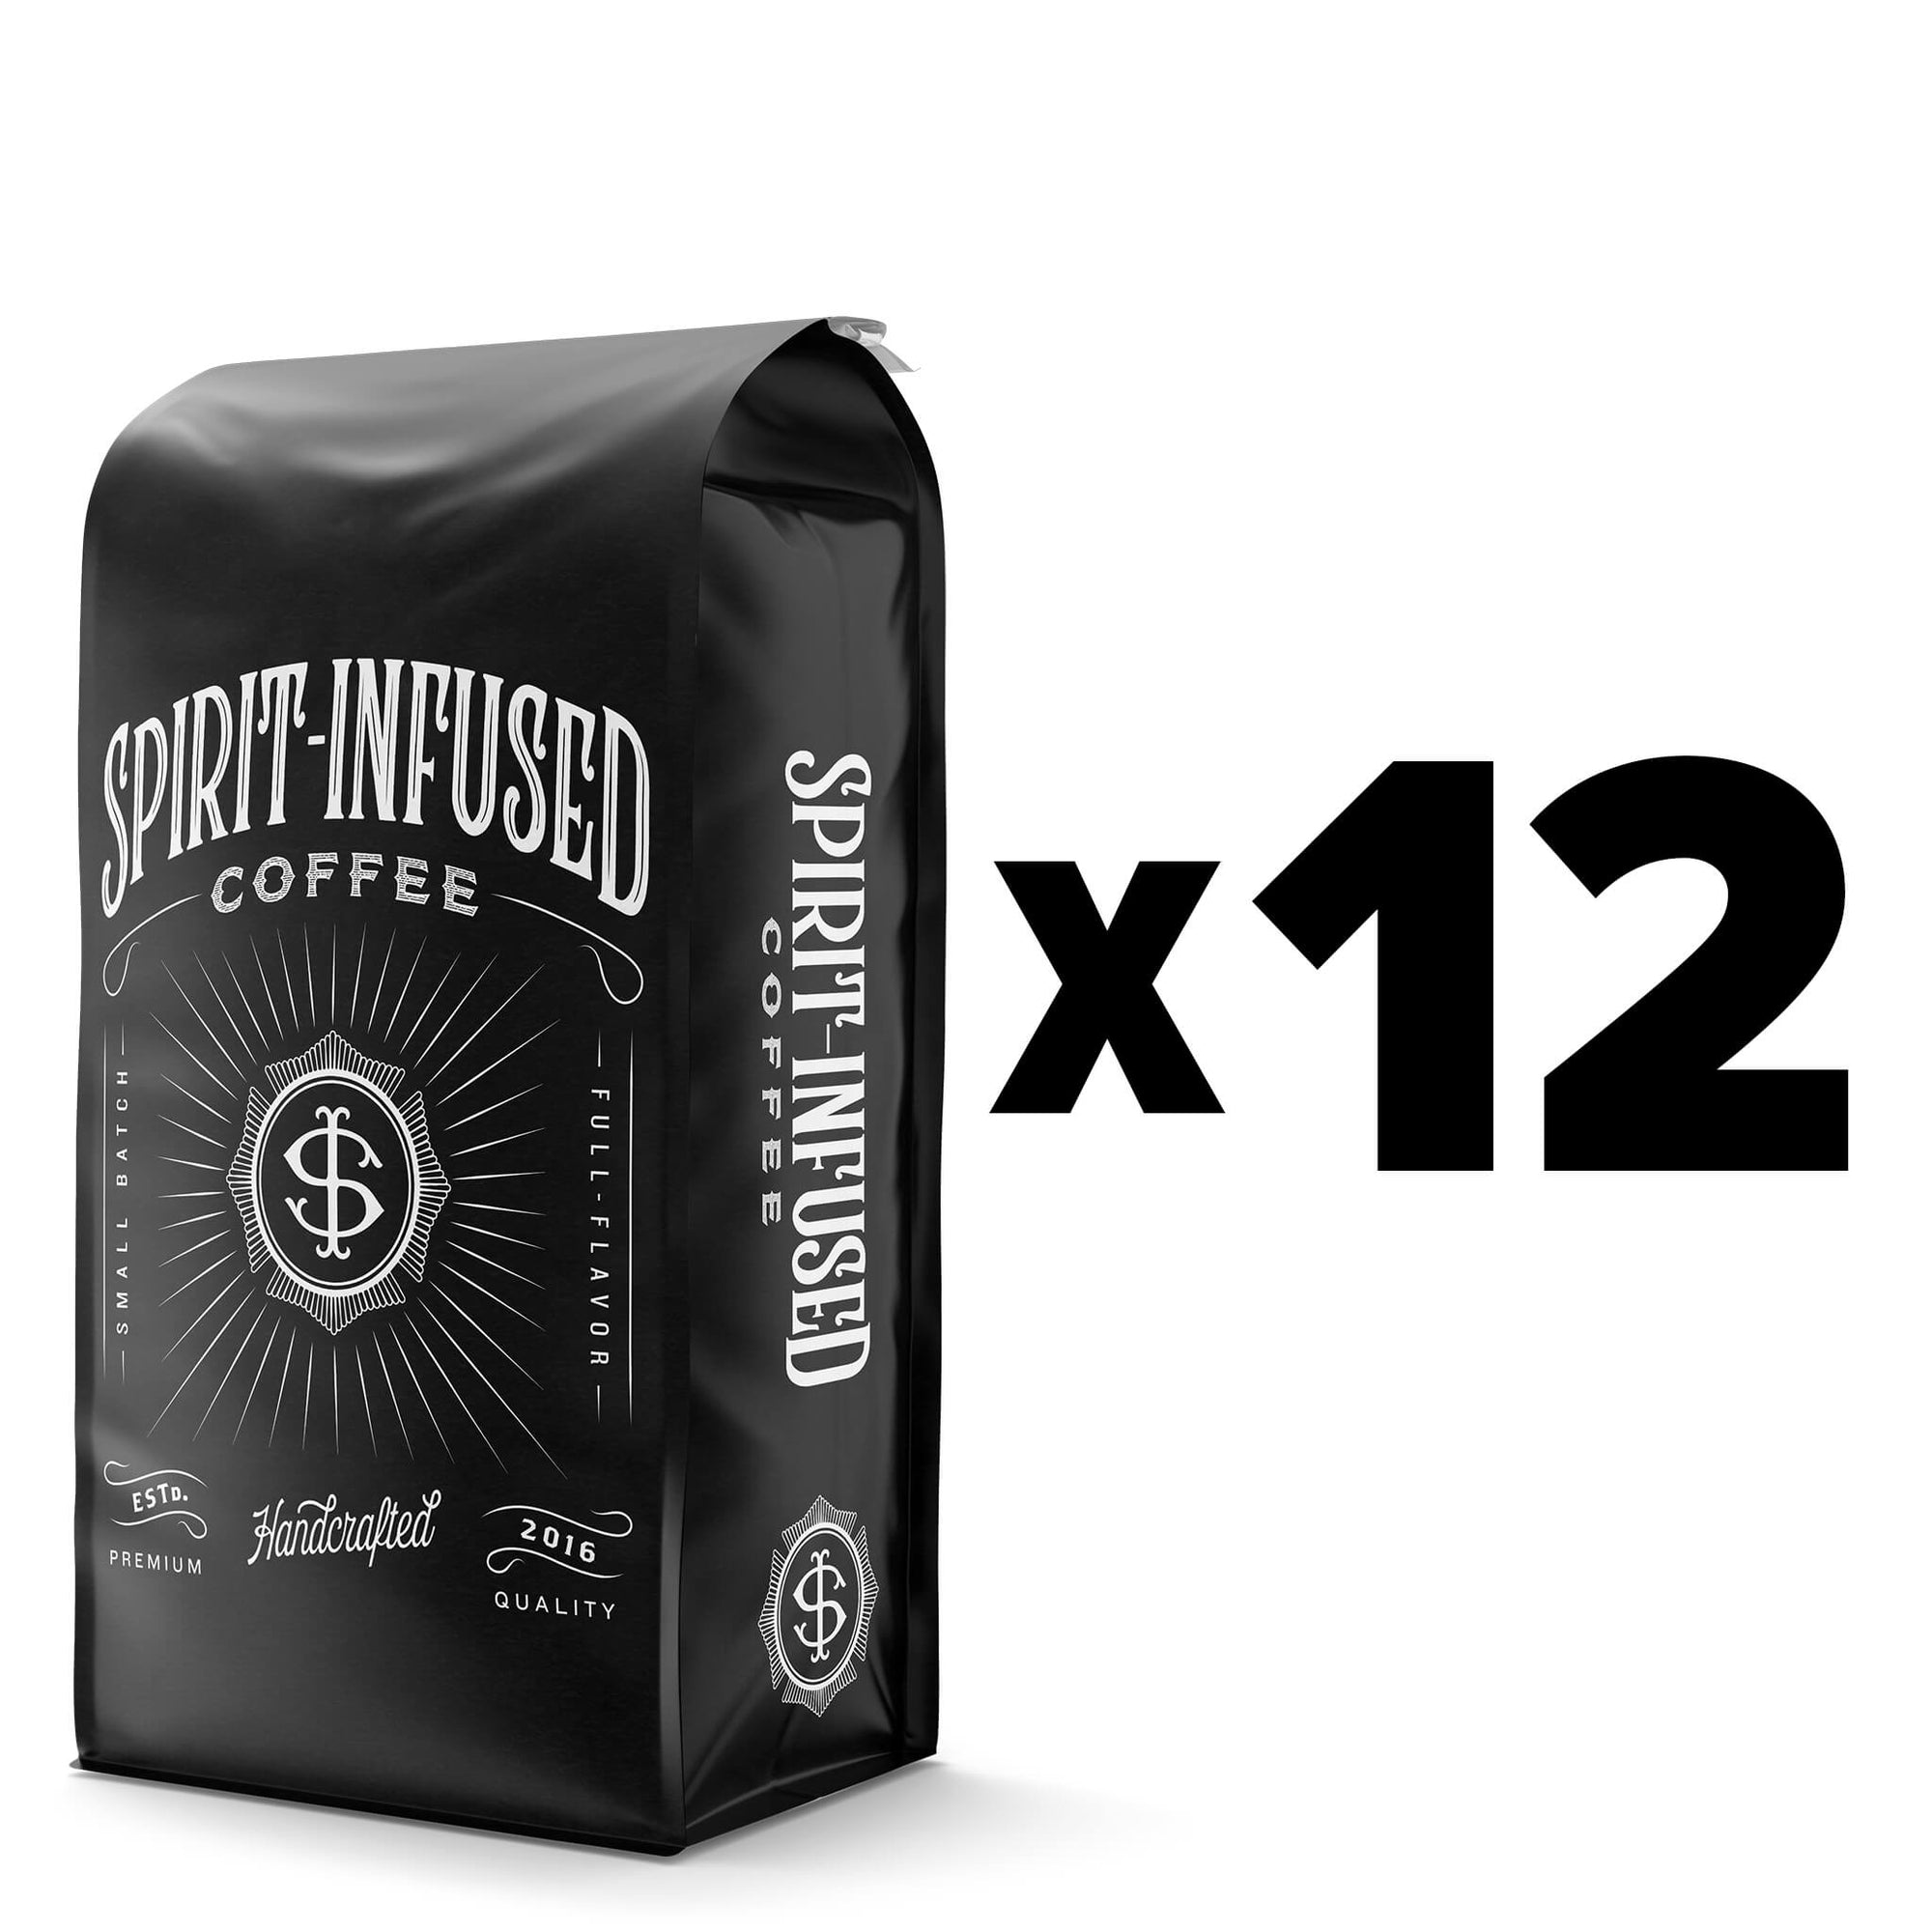 SPIRIT INFUSED COFFEE CLUB GROUND - 12 MONTH PREPAID SUBSCRIPTION